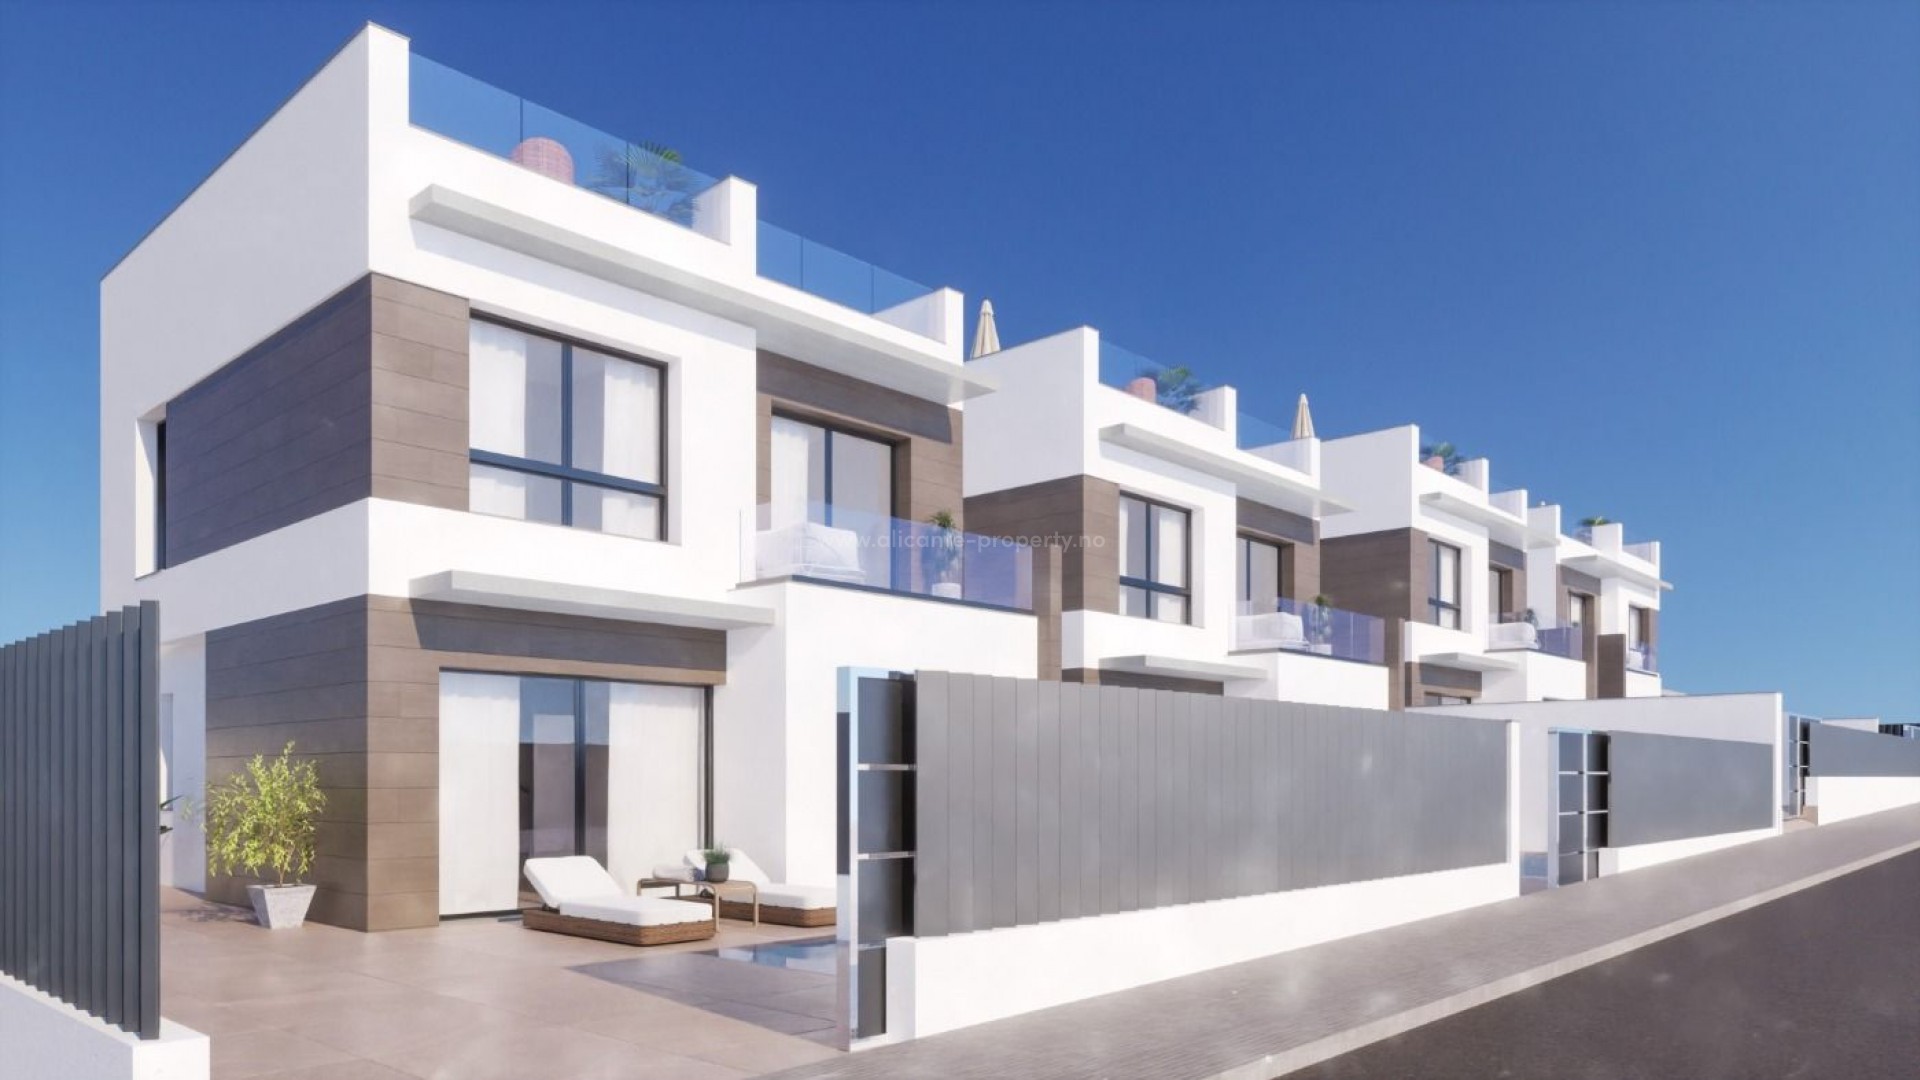 New construction of modern villas/houses in Benijofar, 3 bedrooms, 3 bathrooms, close to the beach in Guardamar and several golf courses, private garden with pool, private parking